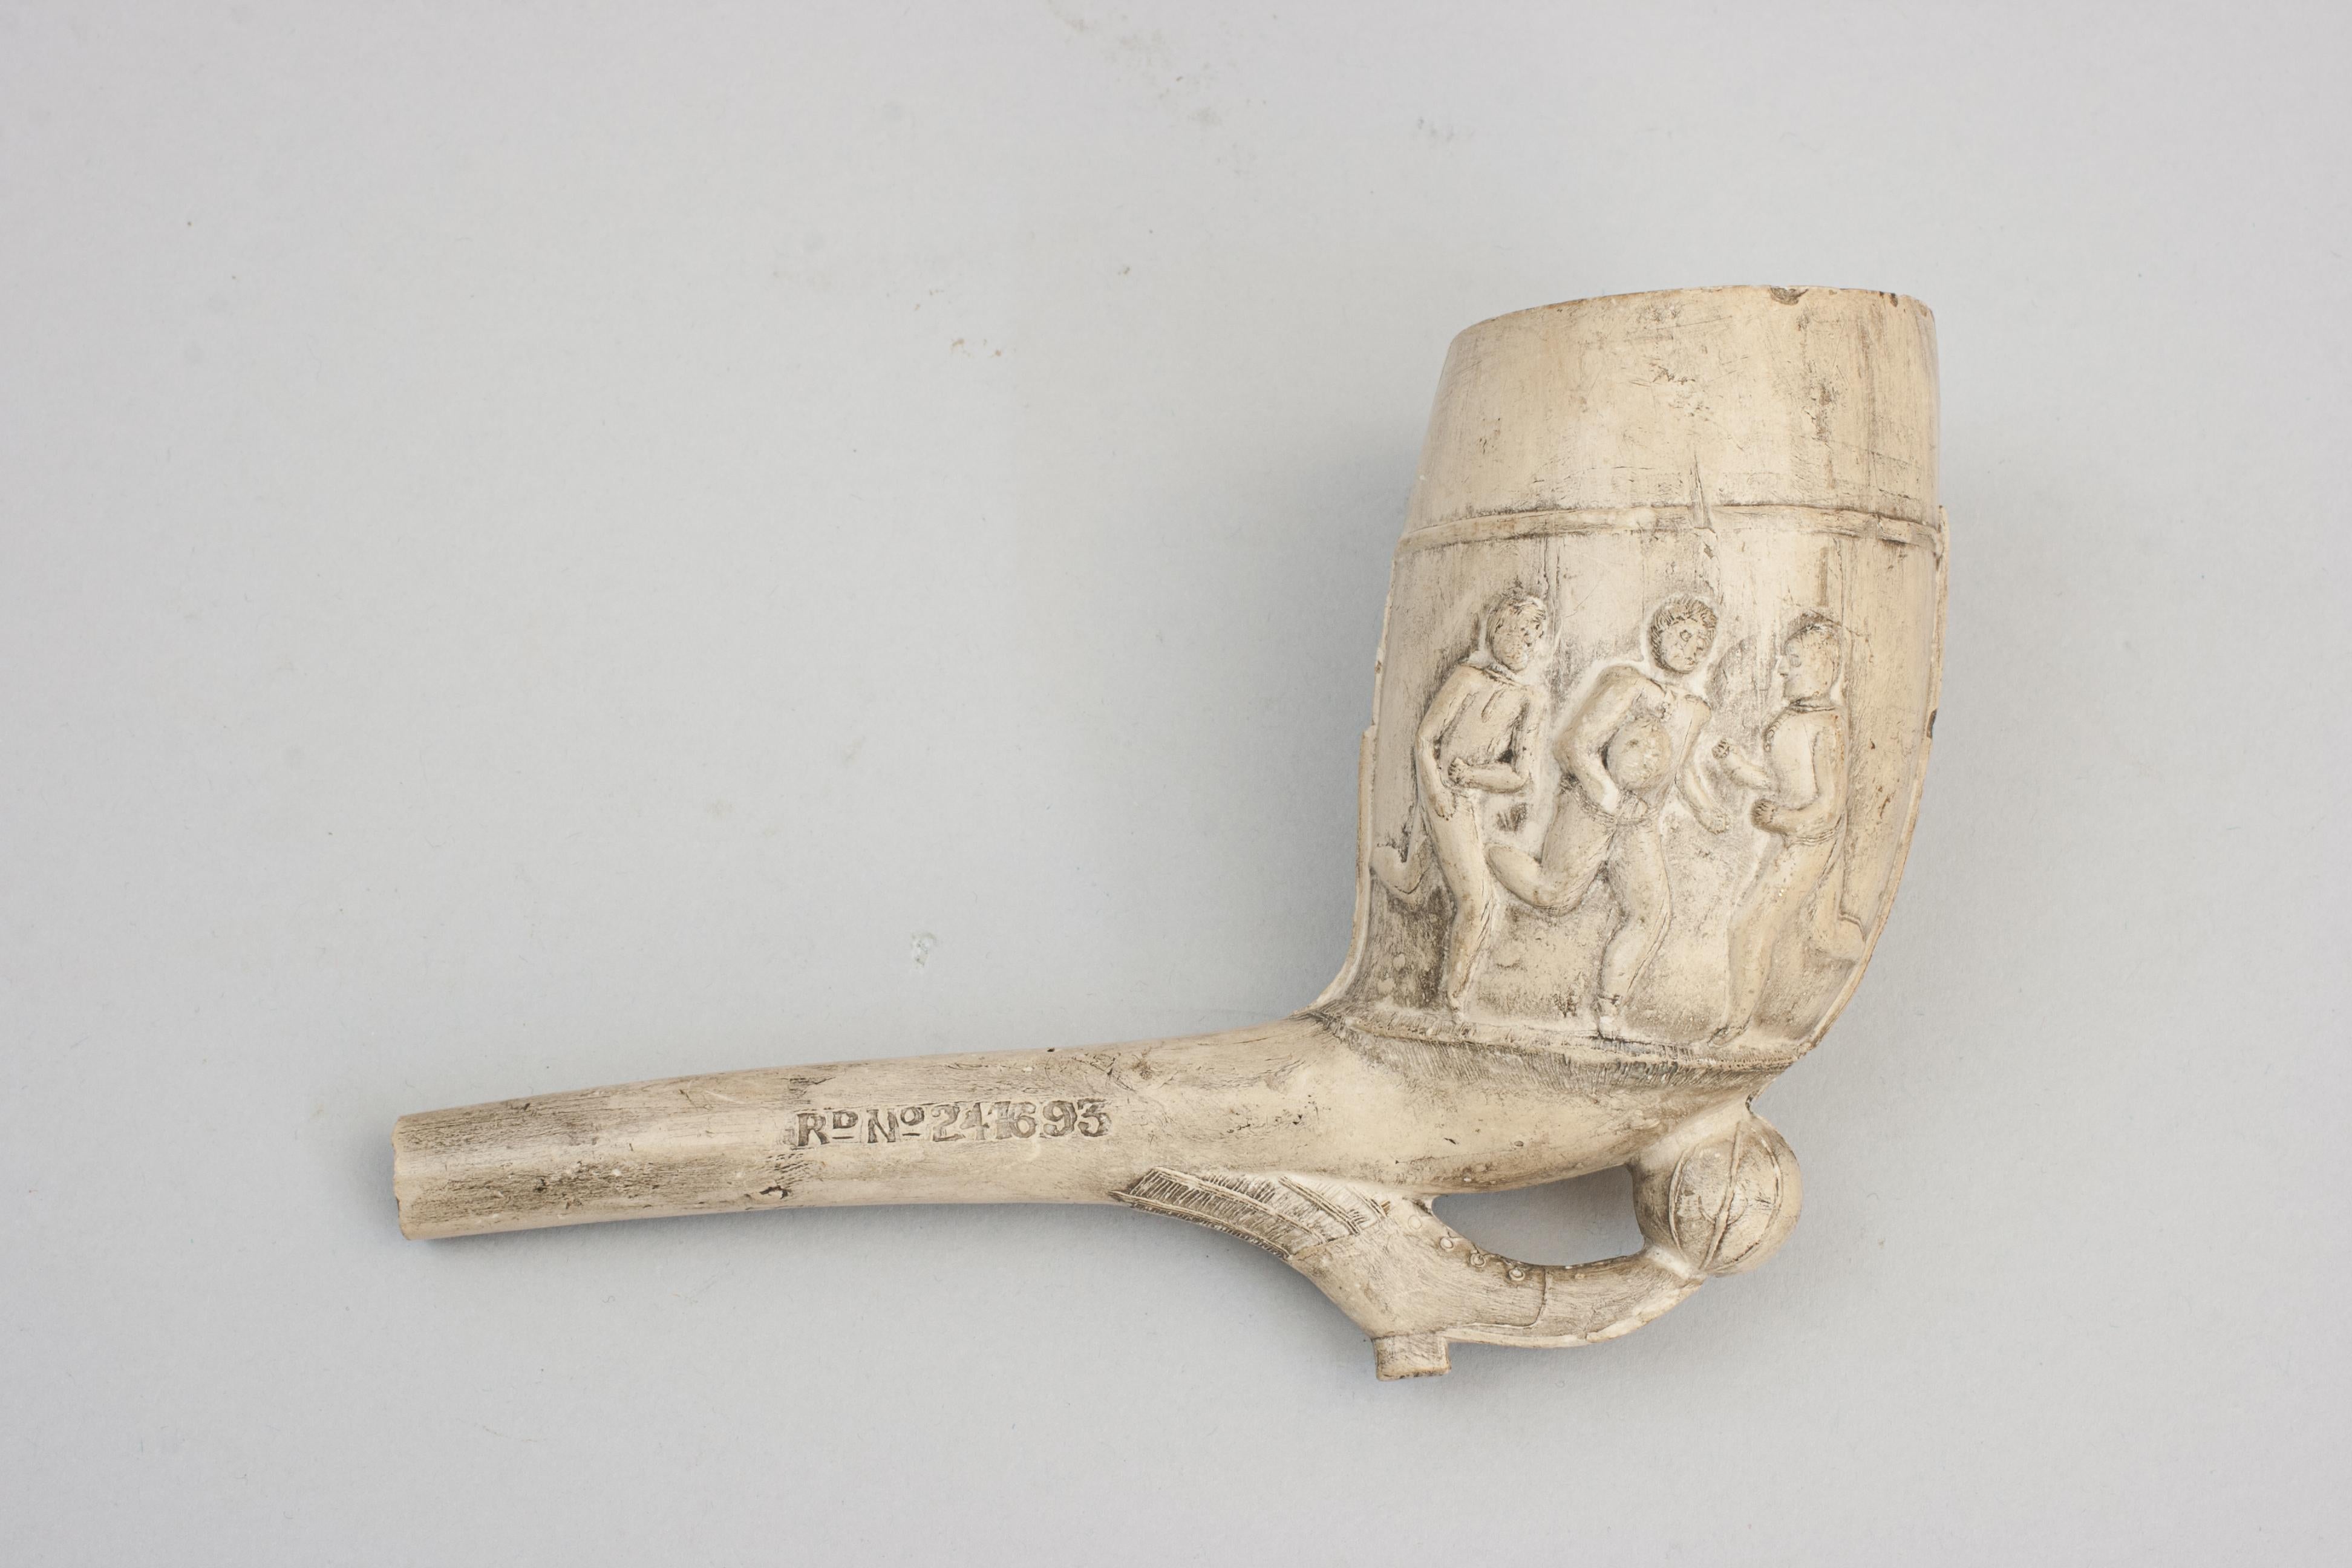 Victorian Sporting Clay Tobacco Pipe.
An early embossed Football & Rugby clay pipe. The large bowl decorated in relief with three football players on one side and three rugby players on the other, the rest being a football & boot. The stem with